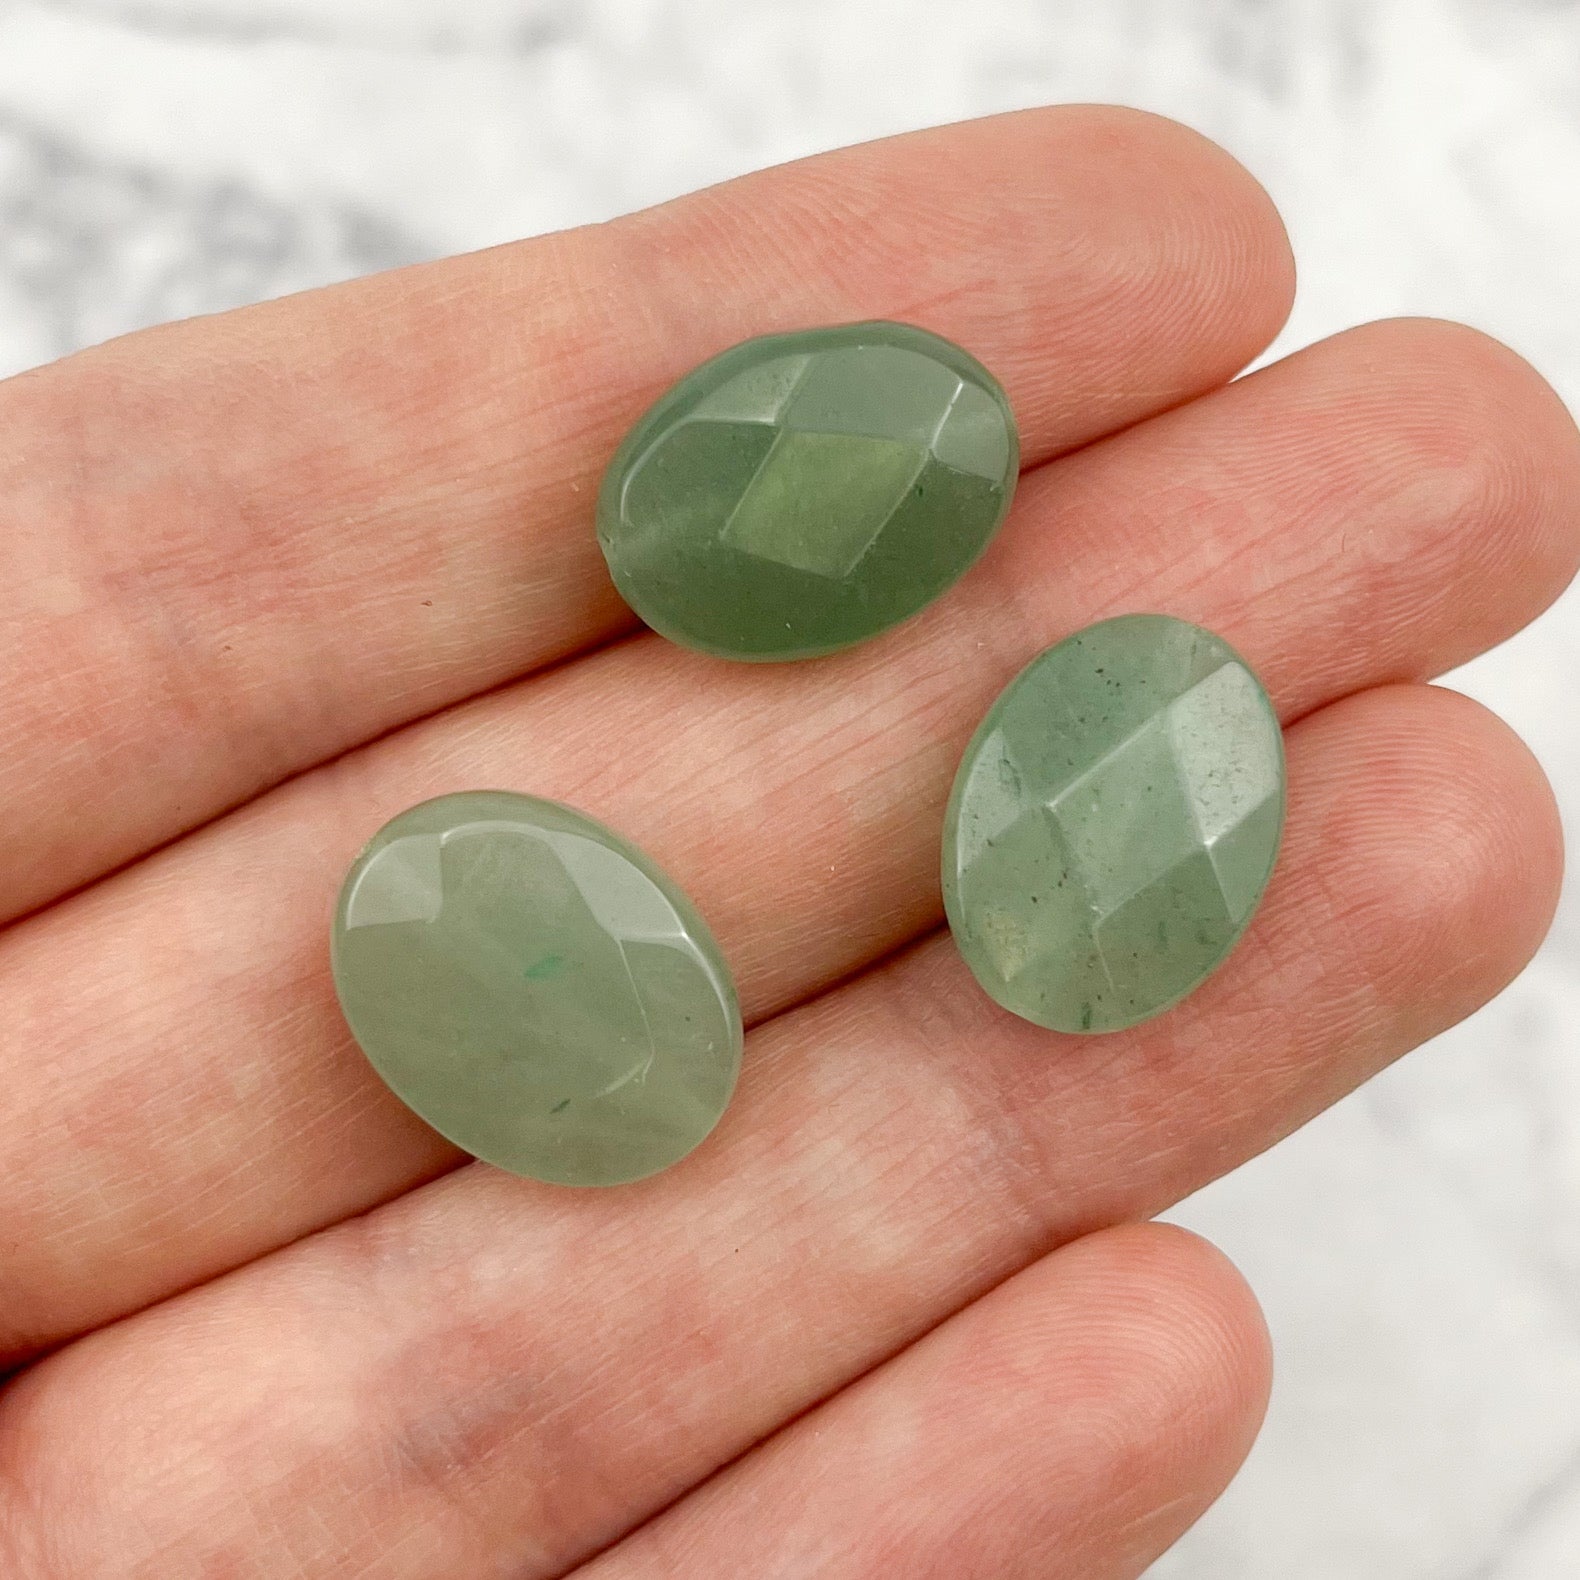 17mm x 13mm Green Aventurine Faceted Oval Focal Bead Pack (3 Beads)